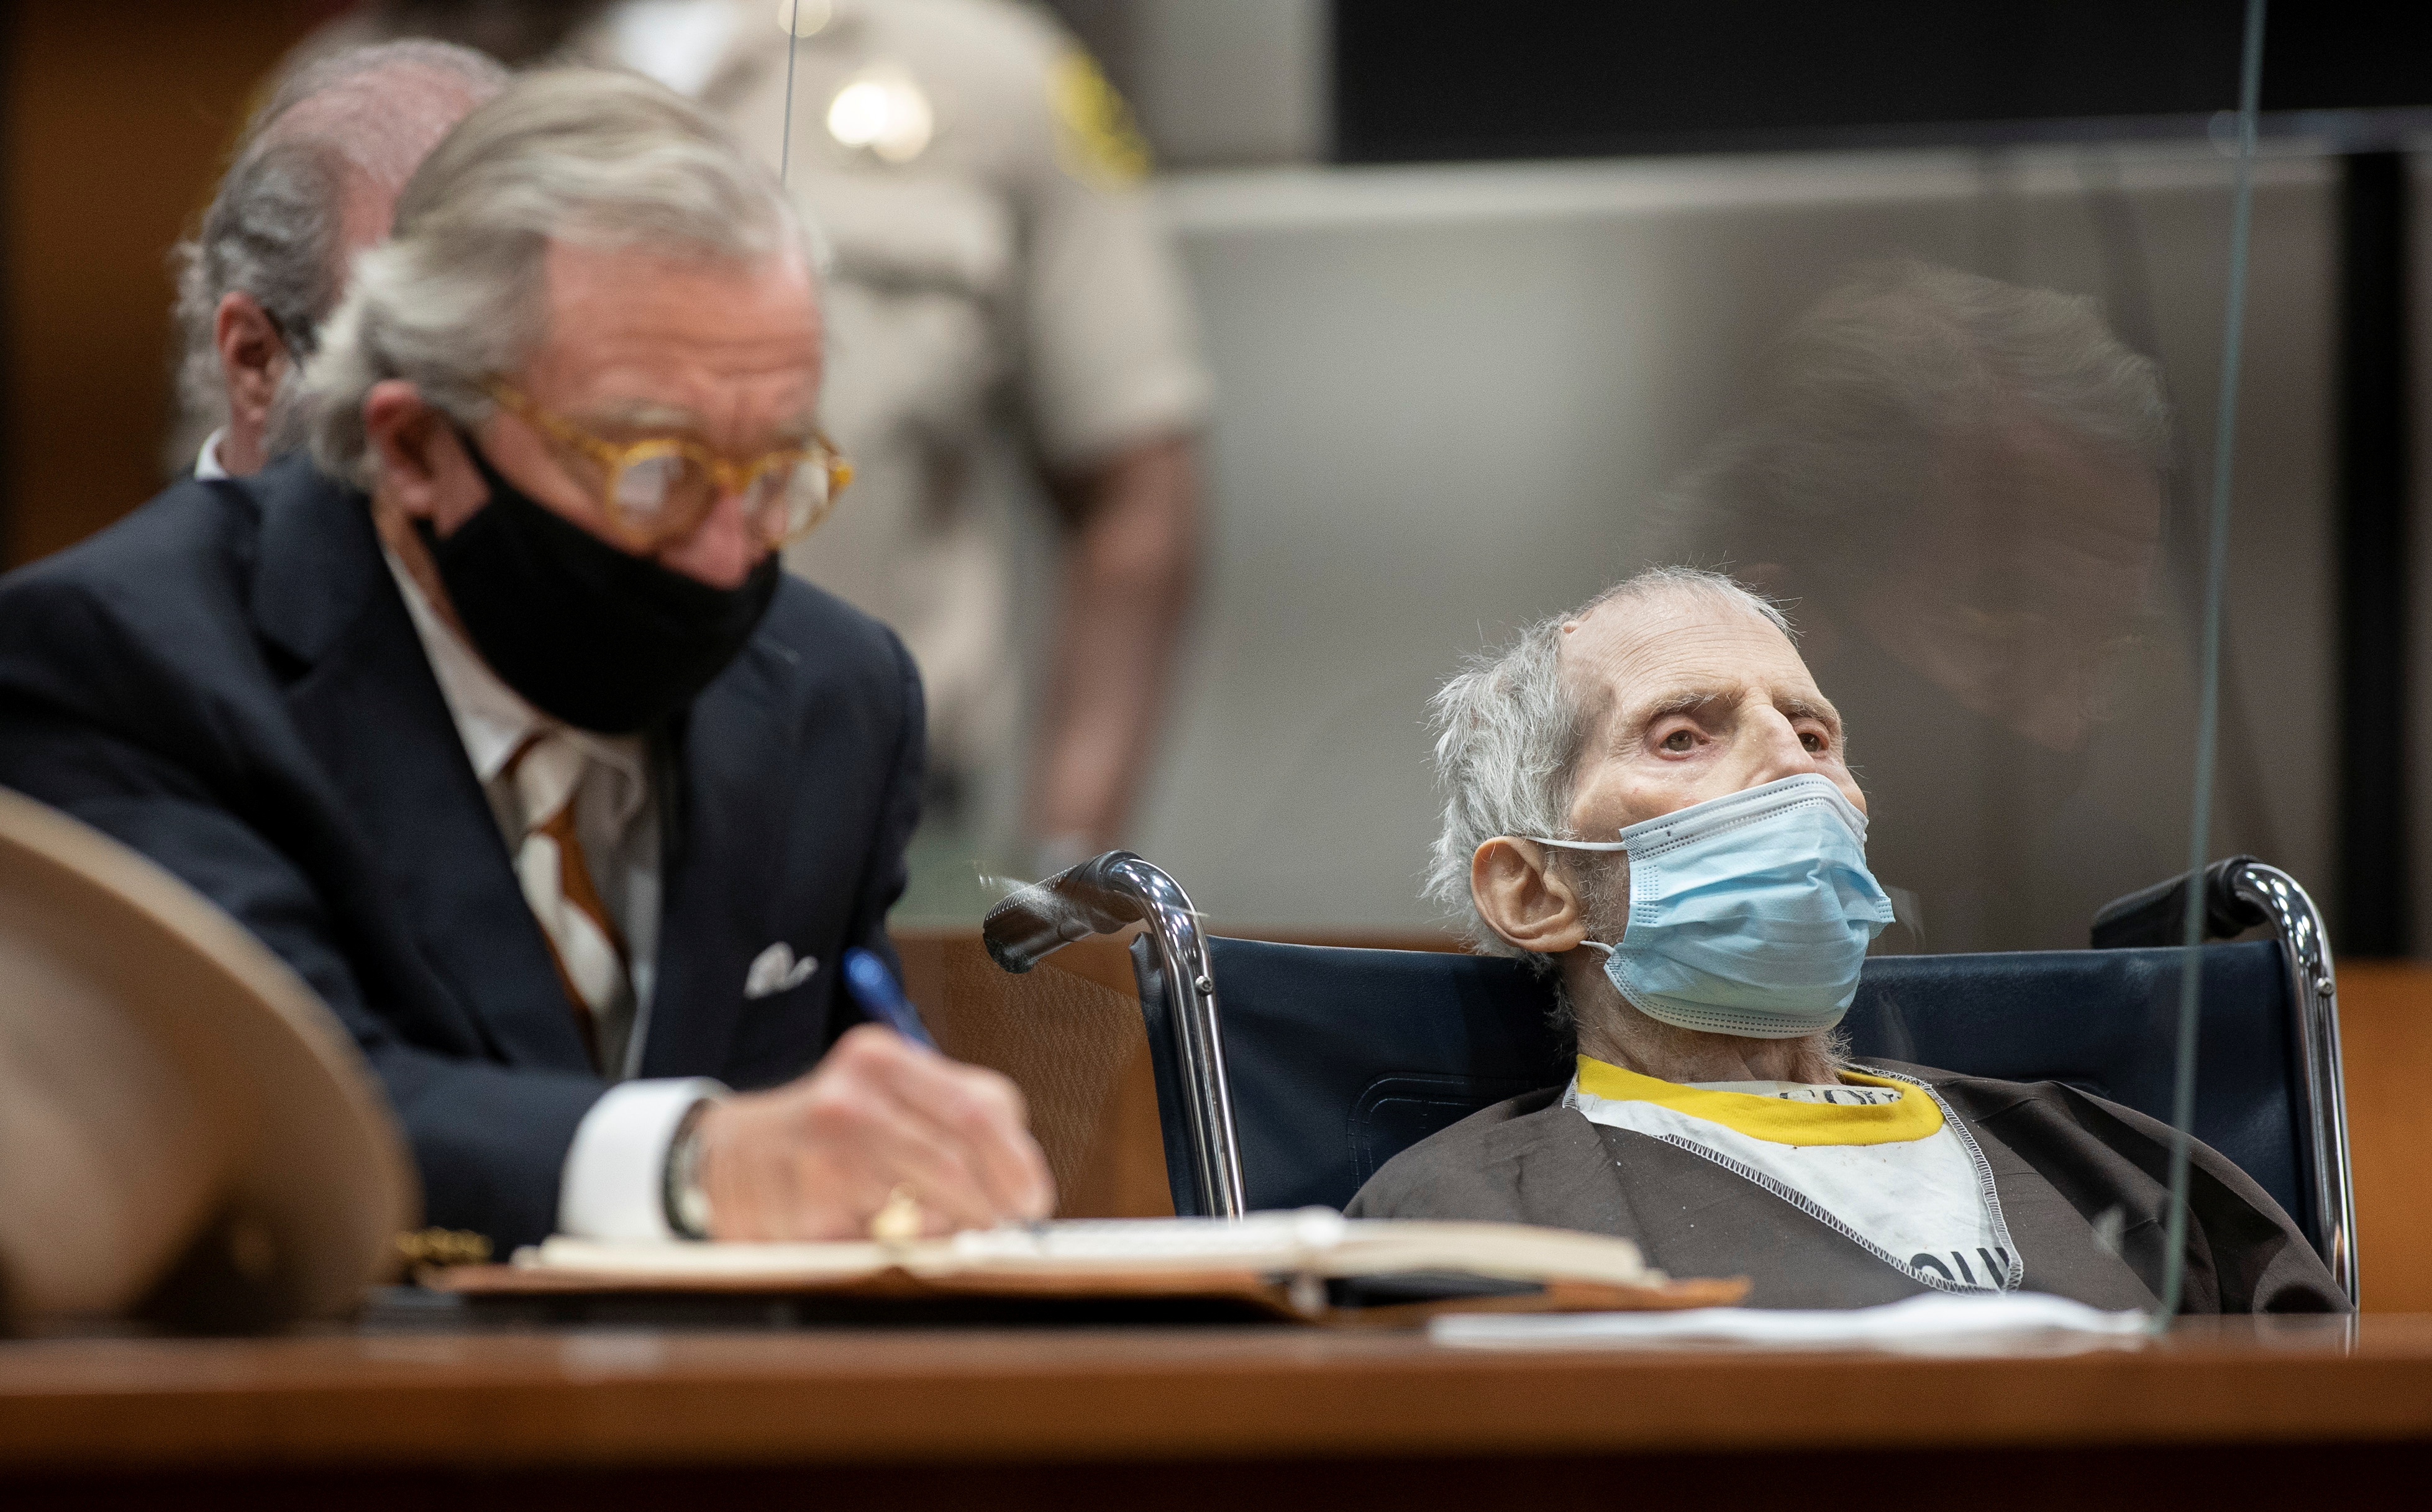 Robert Durst, seated with attorney Dick DeGuerin, was sentenced to life without possibility of parole for the killing of Susan Berman, in Los Angeles